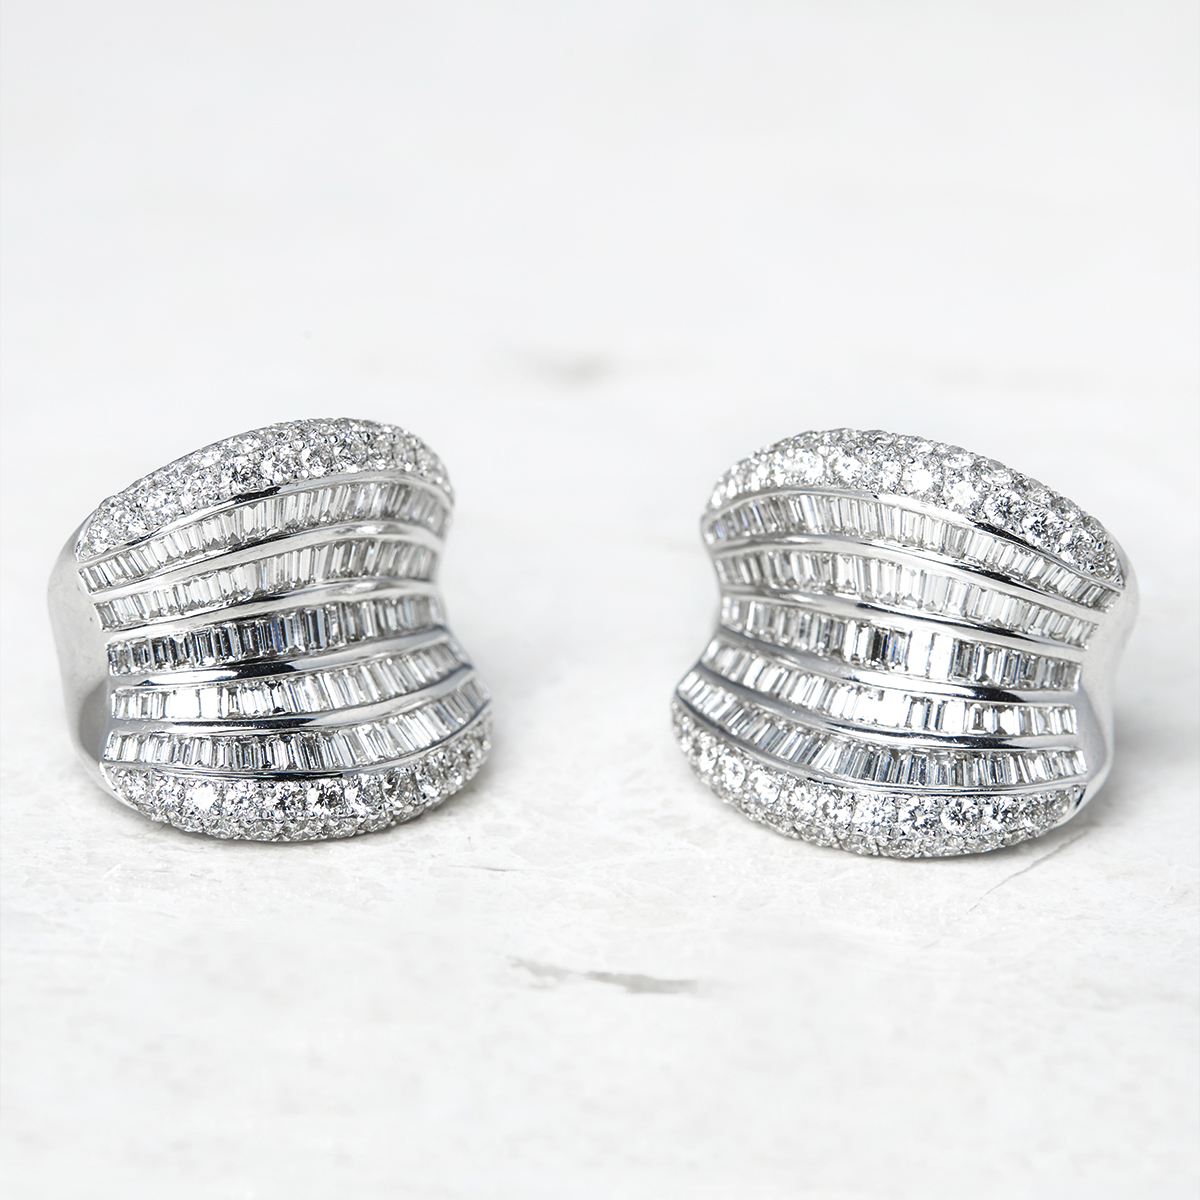 18k White Gold 12.00ct Baguette & Round Cut Diamond Earrings - Image 5 of 7